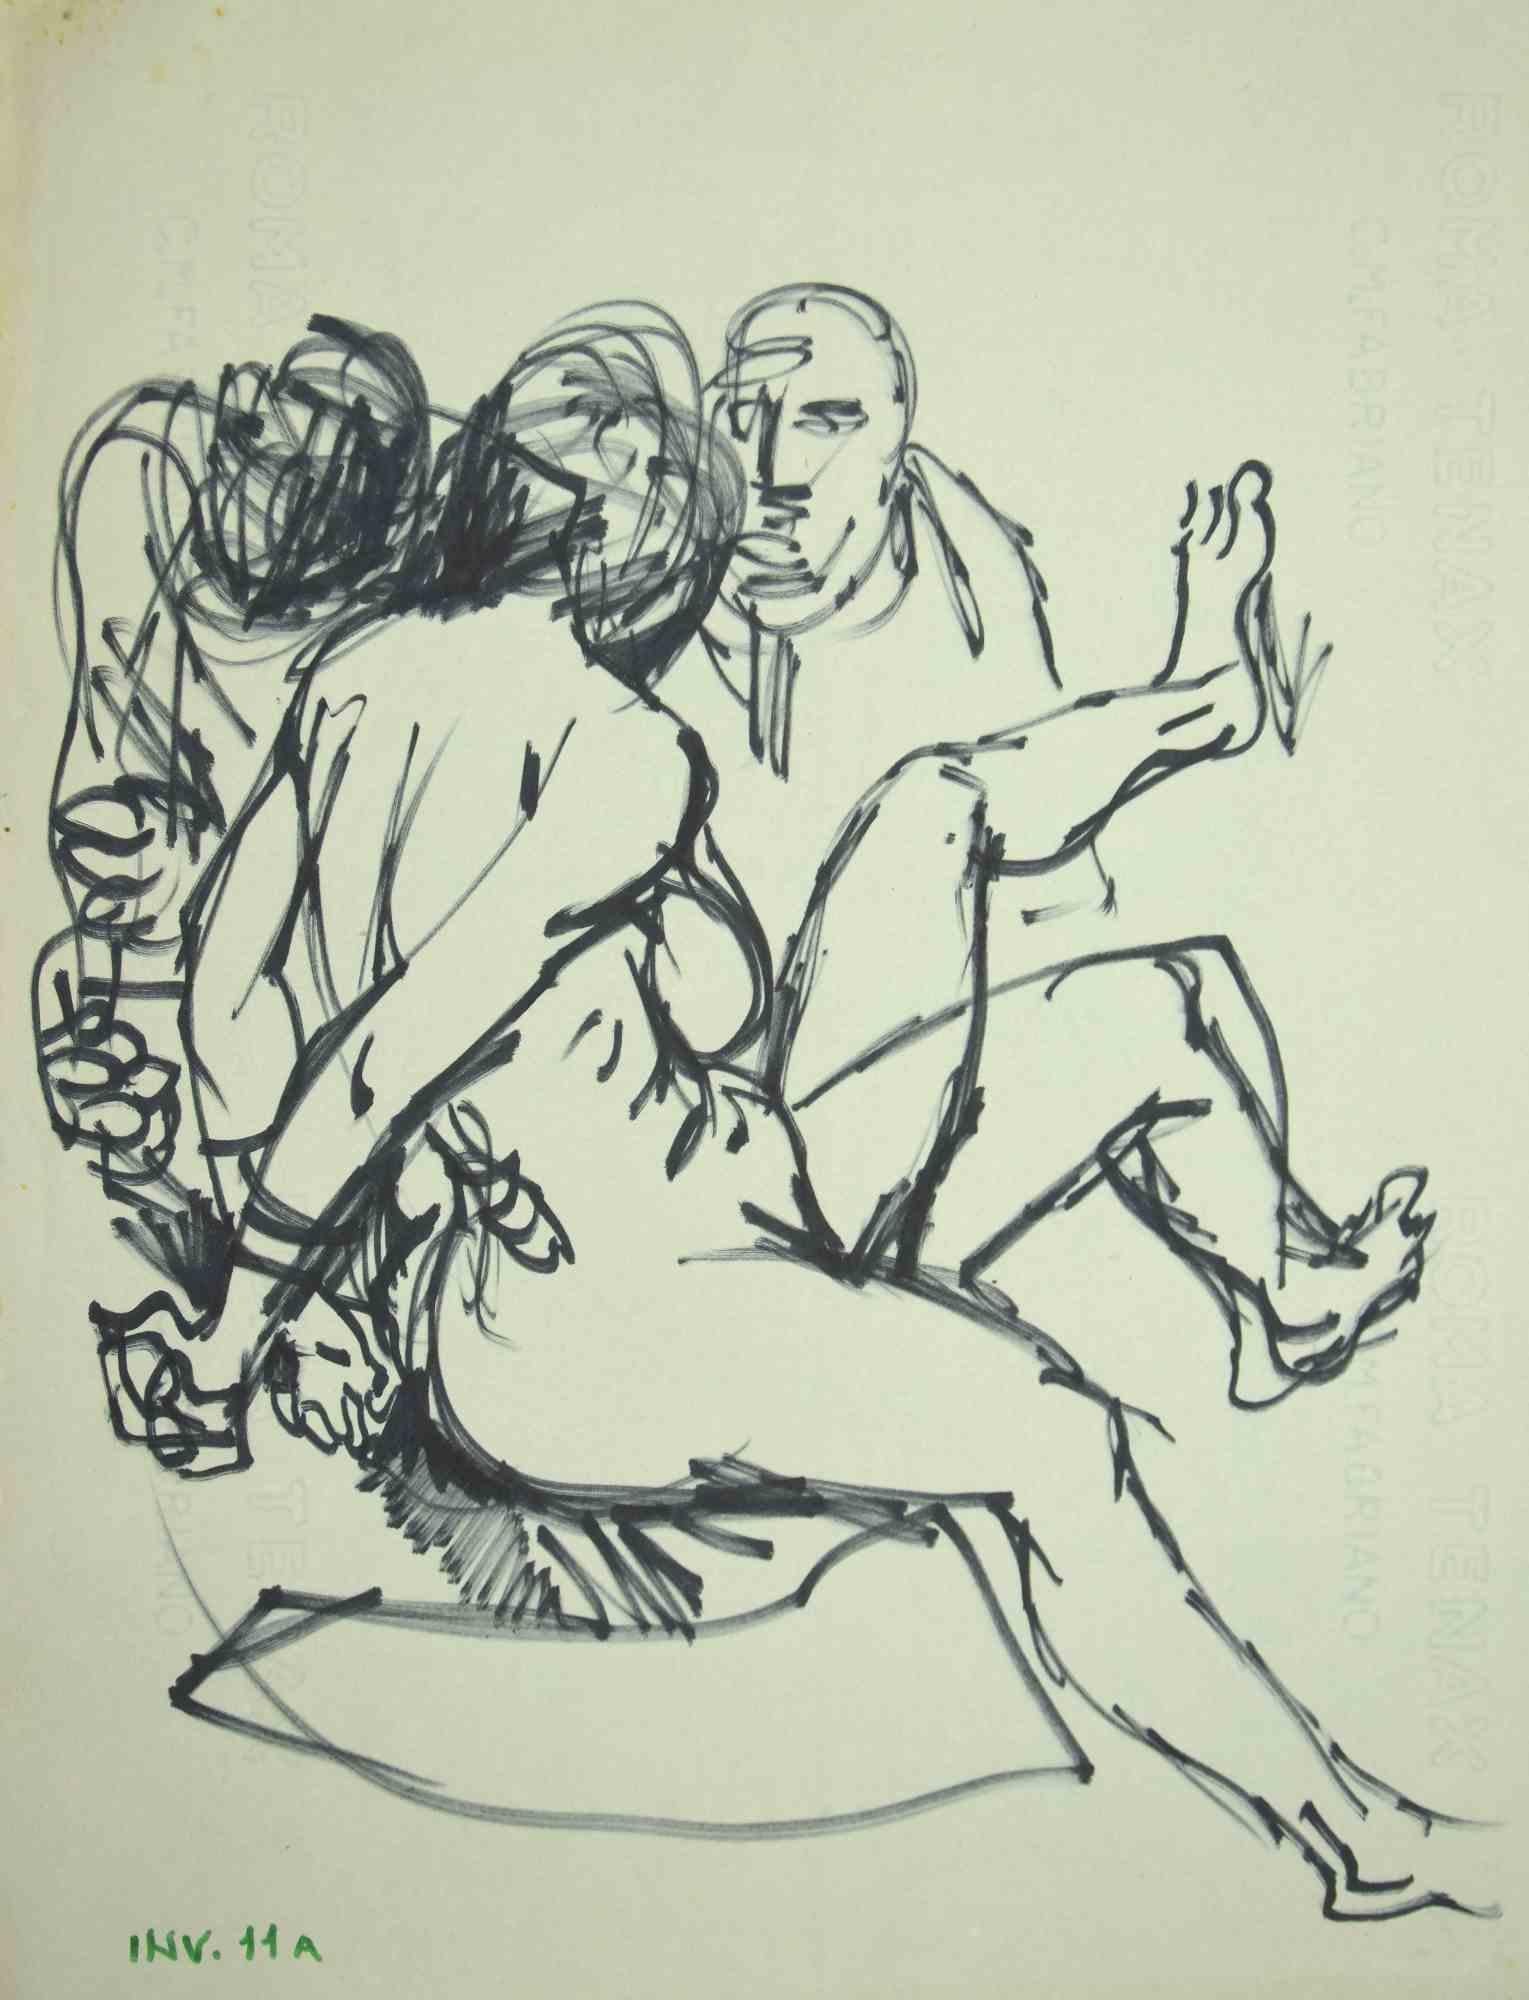 Figures is an original drawing in black marker pen realized by Leo Guida in the 1970s.

Good condition.

Leo Guida  (1992 - 2017). Sensitive to current issues, artistic movements and historical techniques, Leo Guida has been able to weave with many